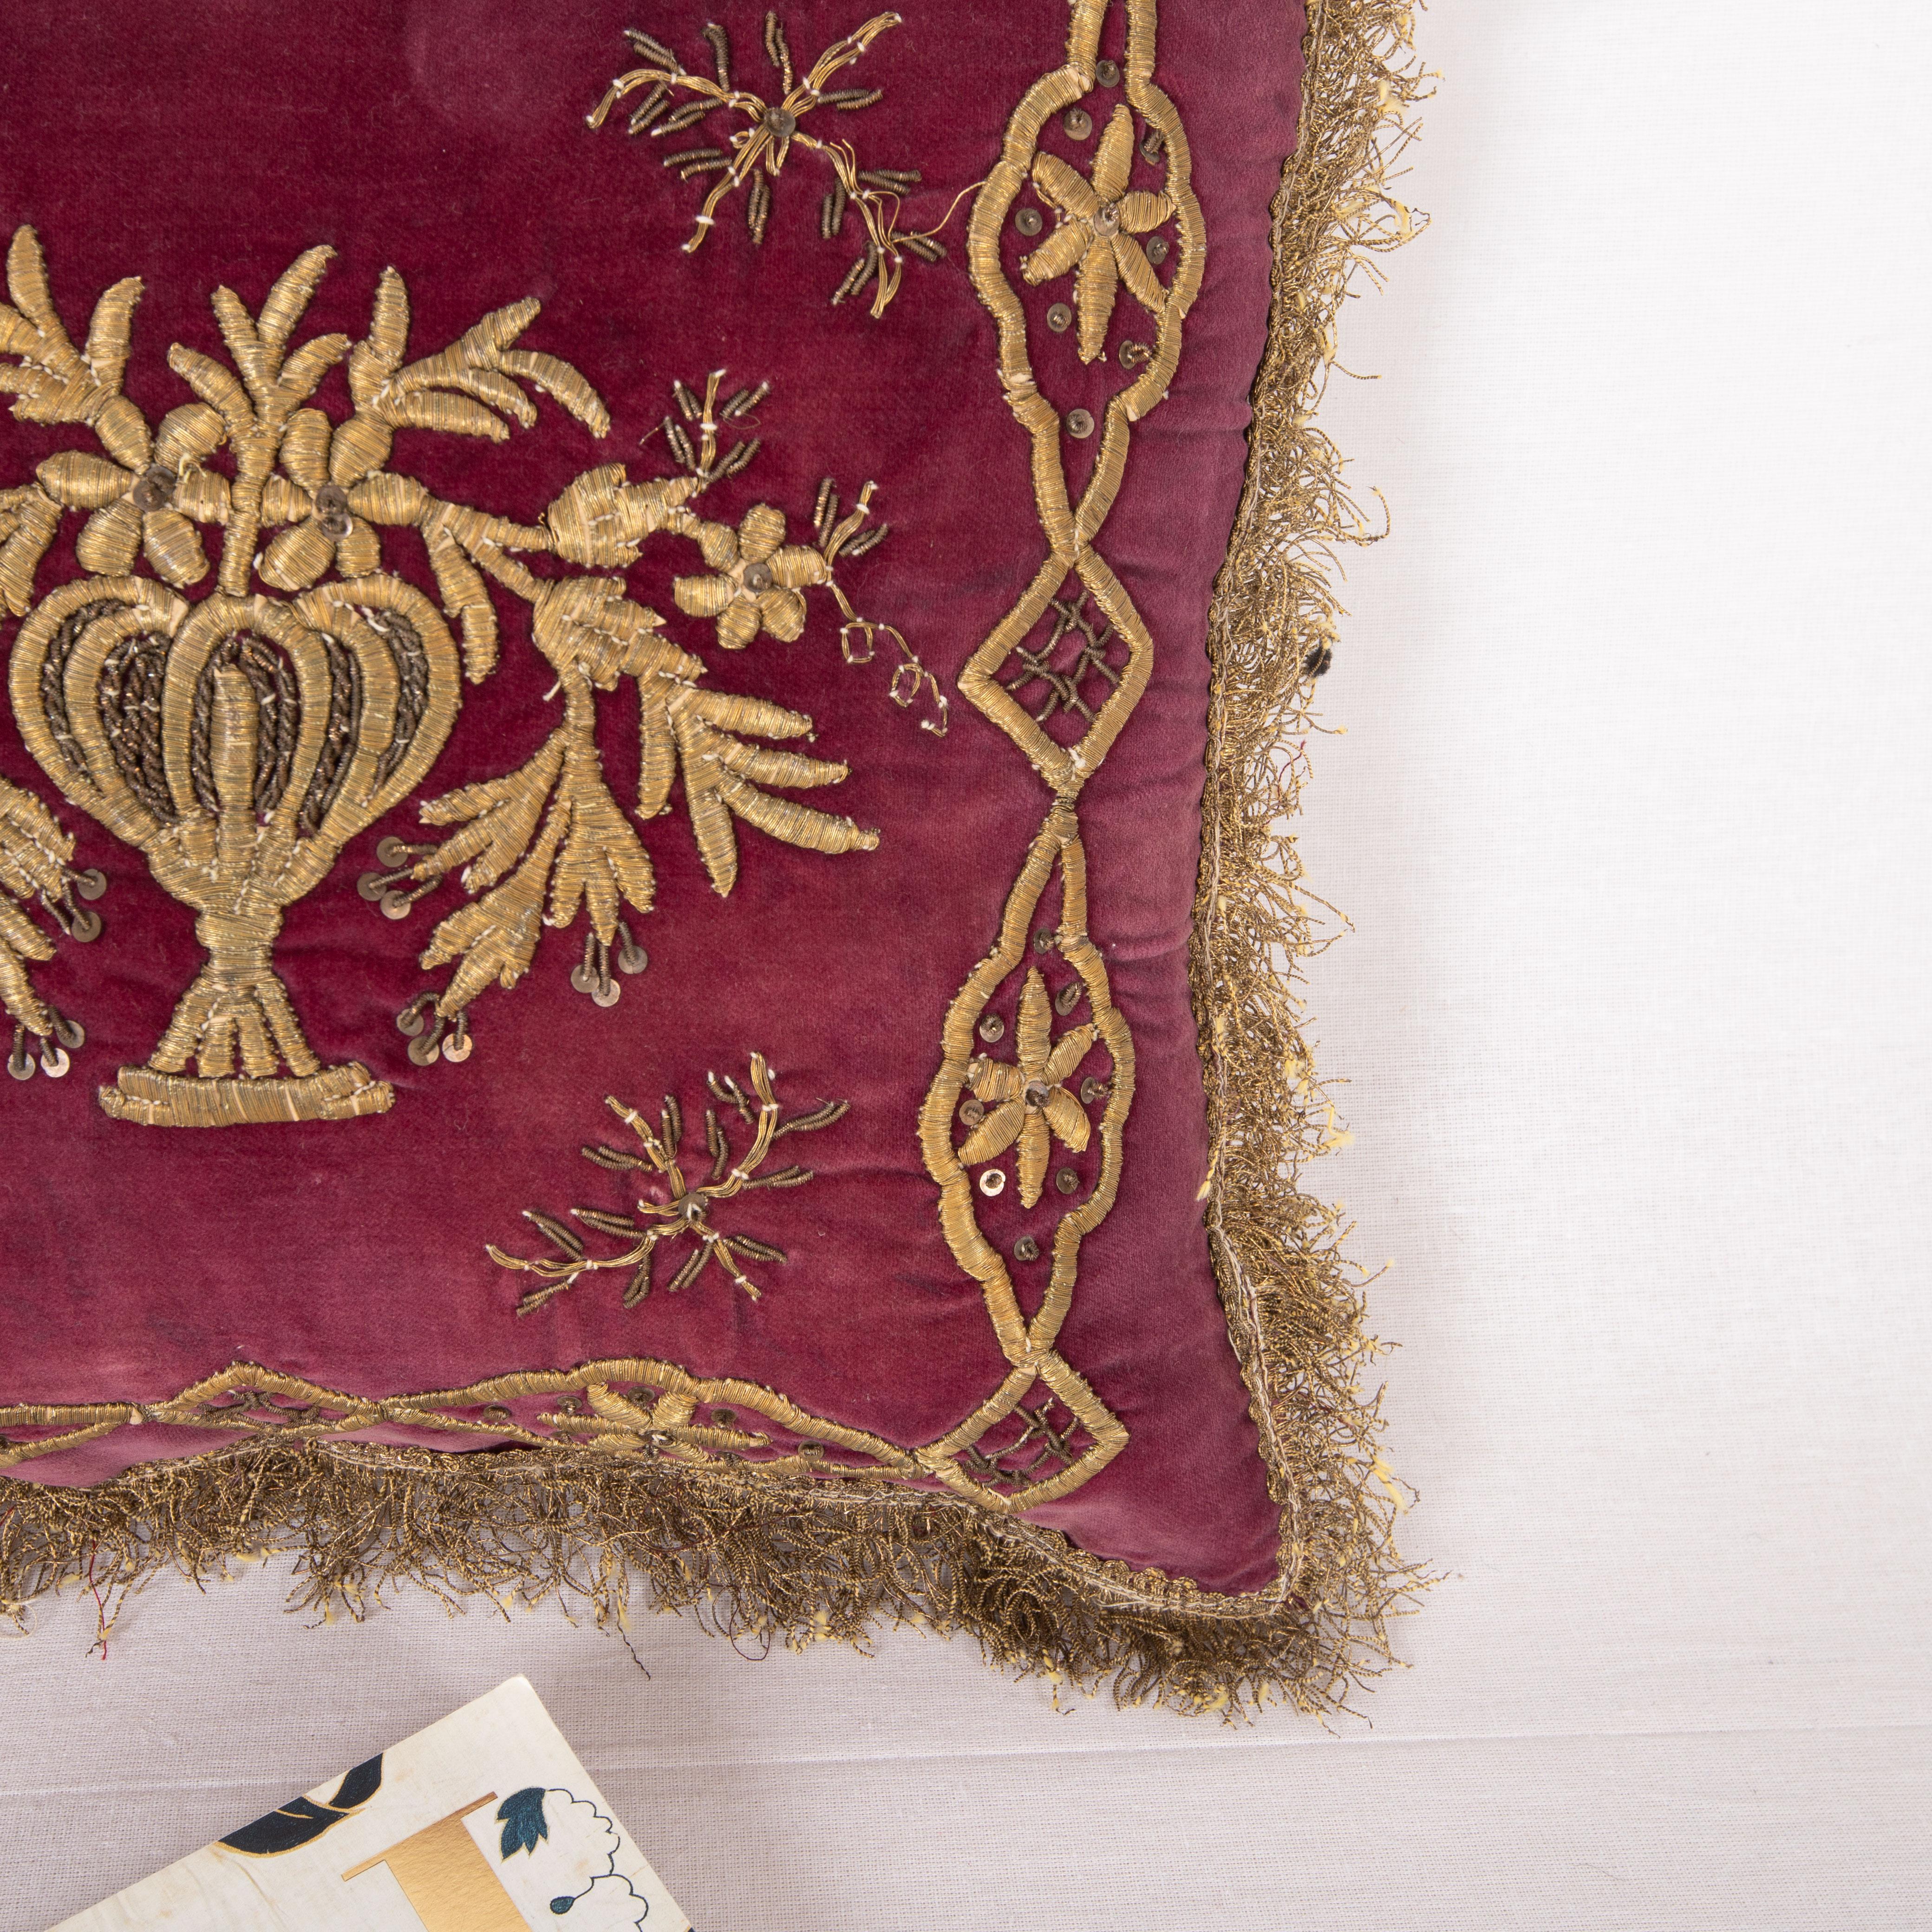 Embroidered Antique Ottoman Velvet Sarma Pillow Cover, Early 20th C.